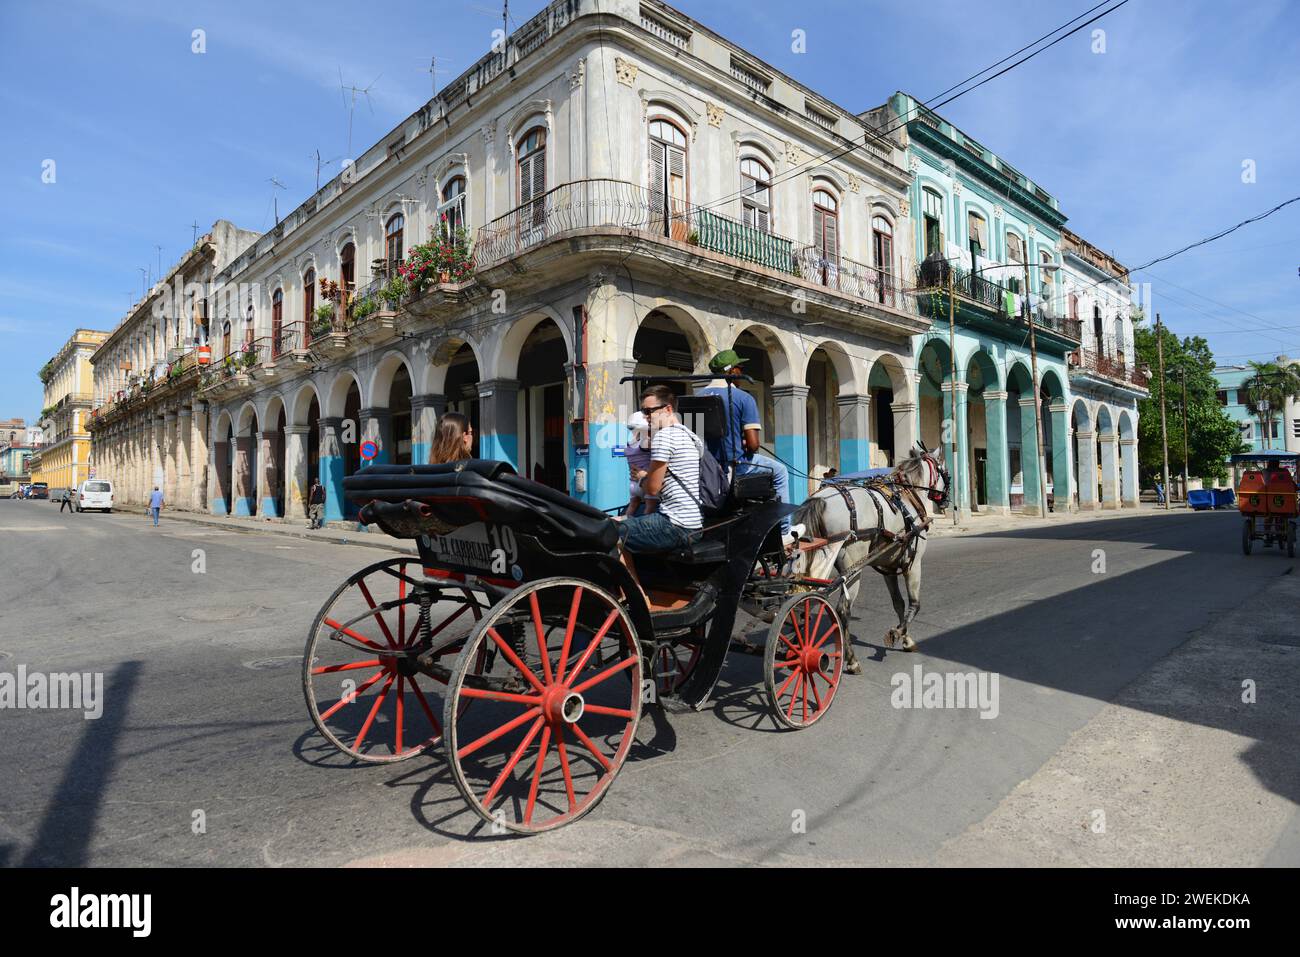 A horse drawn tourist carriage in Old Havana, Cuba. Stock Photo